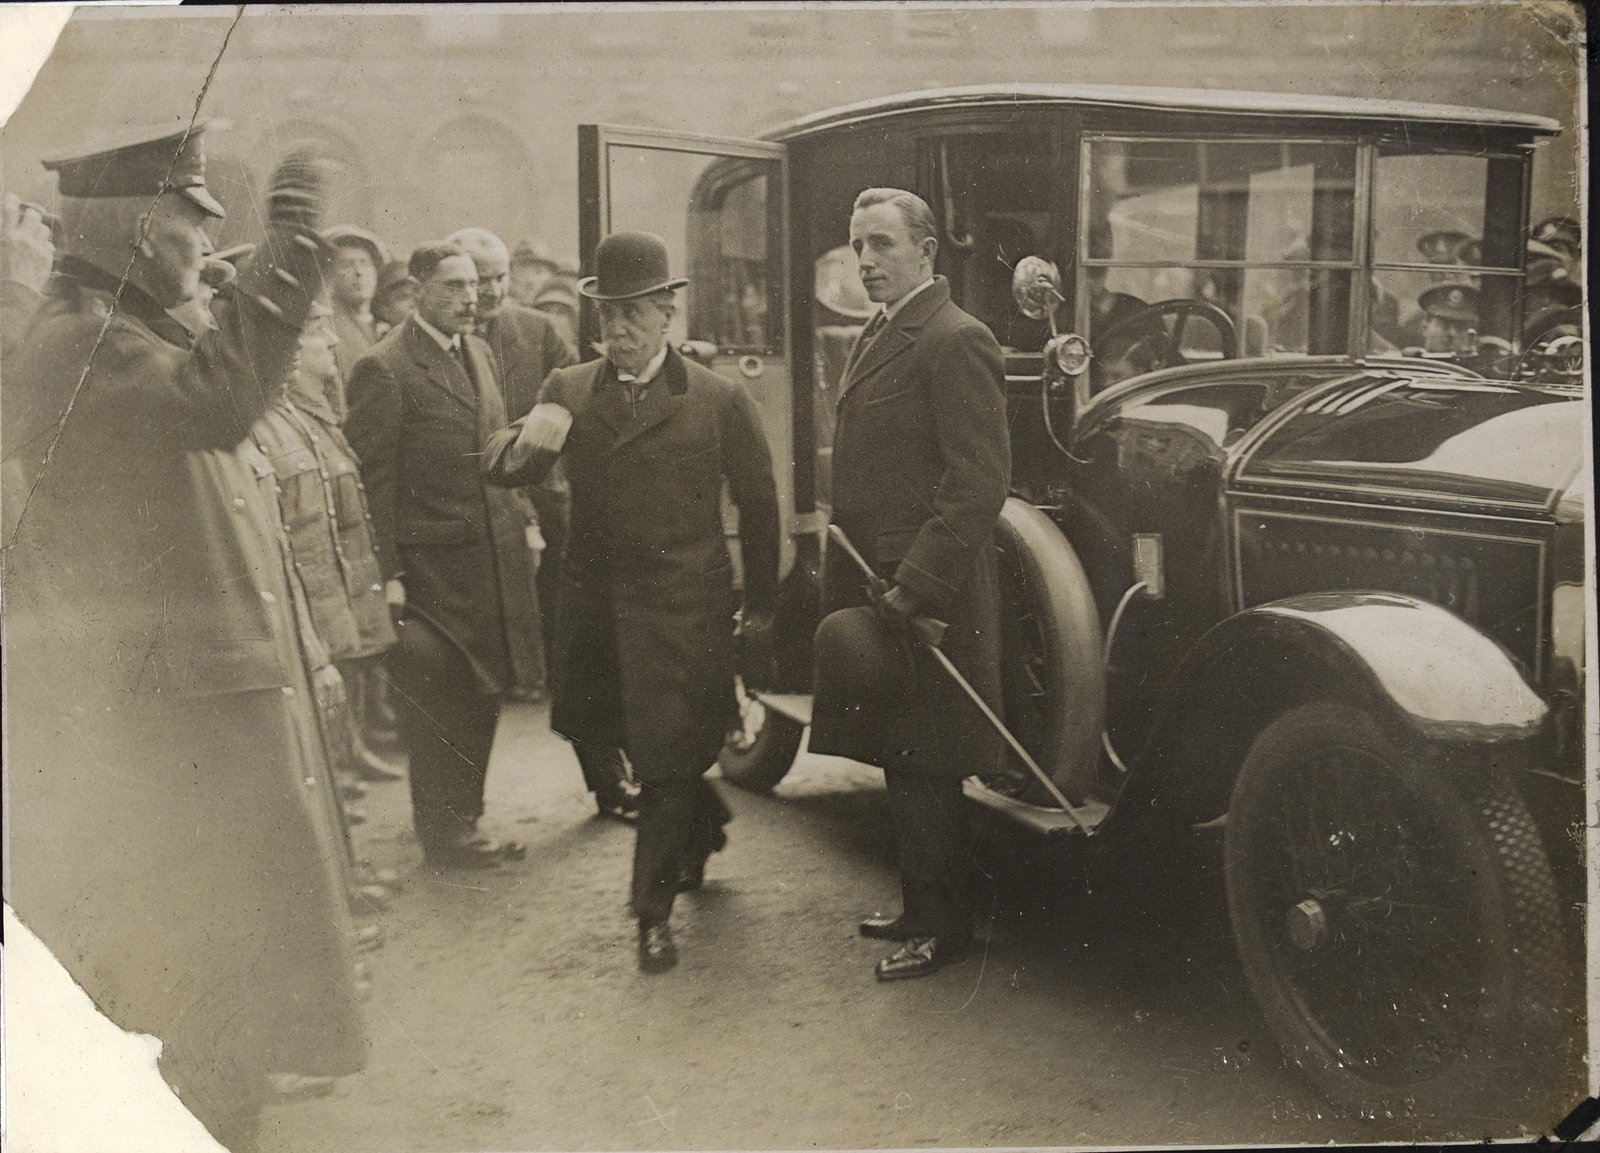 Image - John Denton Pinkstone French, former Lord Lieutenant of Ireland, arrives at Dublin Castle for the transfer of power, January 1922. Image courtesy of the National Library of Ireland